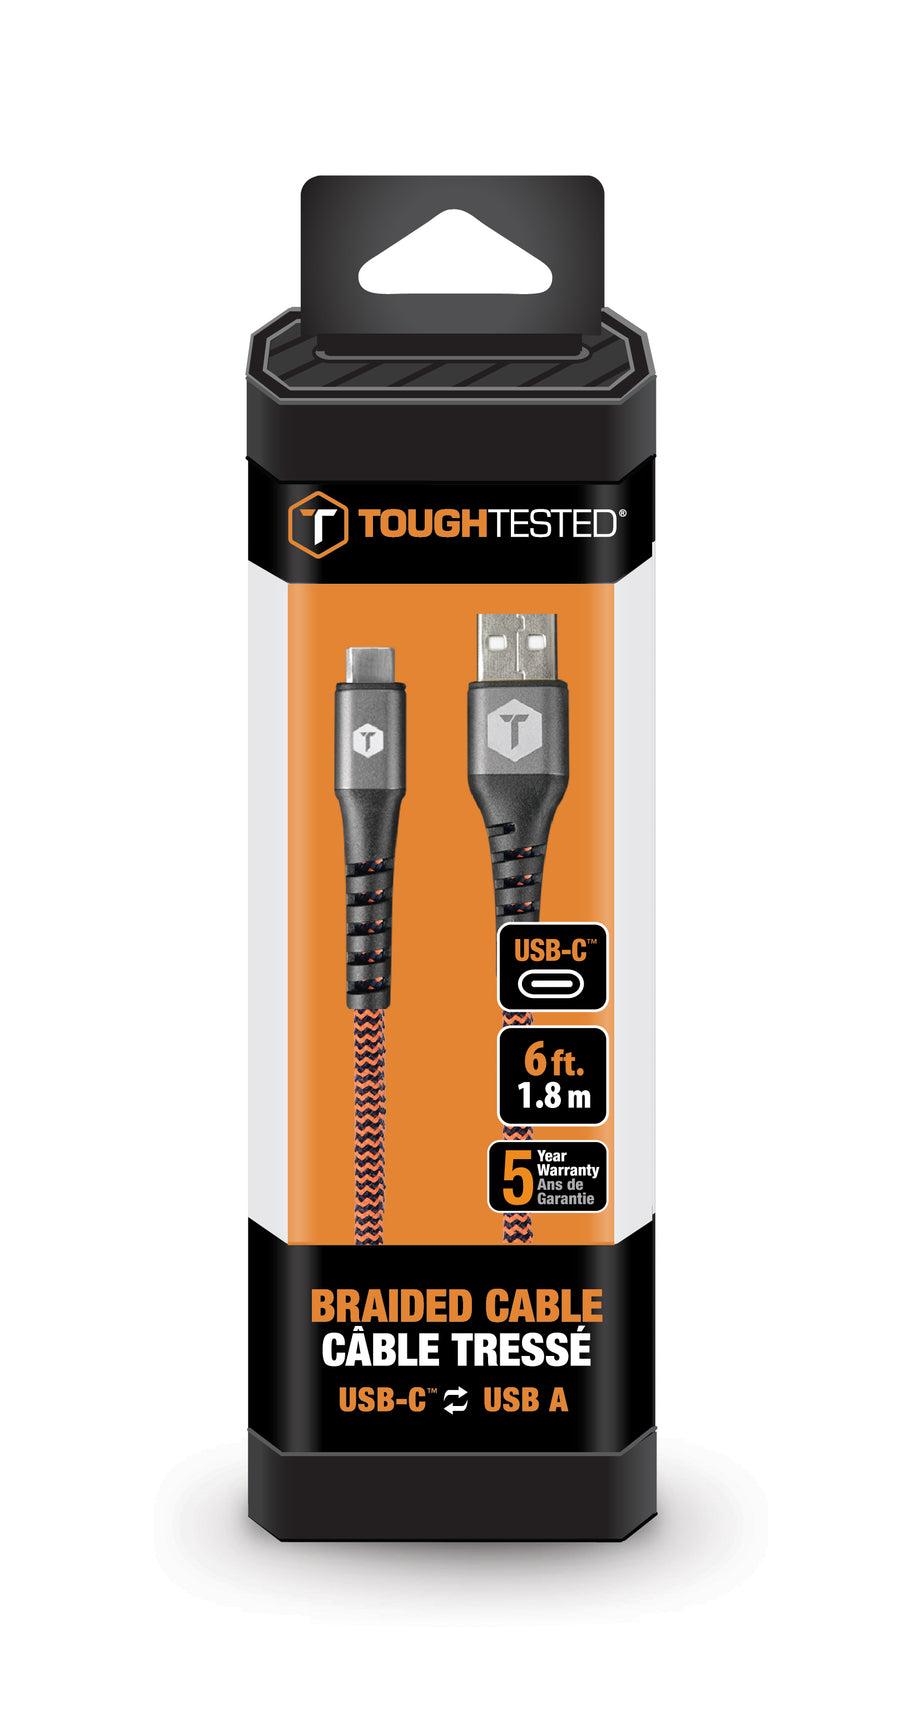 Braided 6 Ft. USB Power/Data Cable with USB-A to USB-C Connector